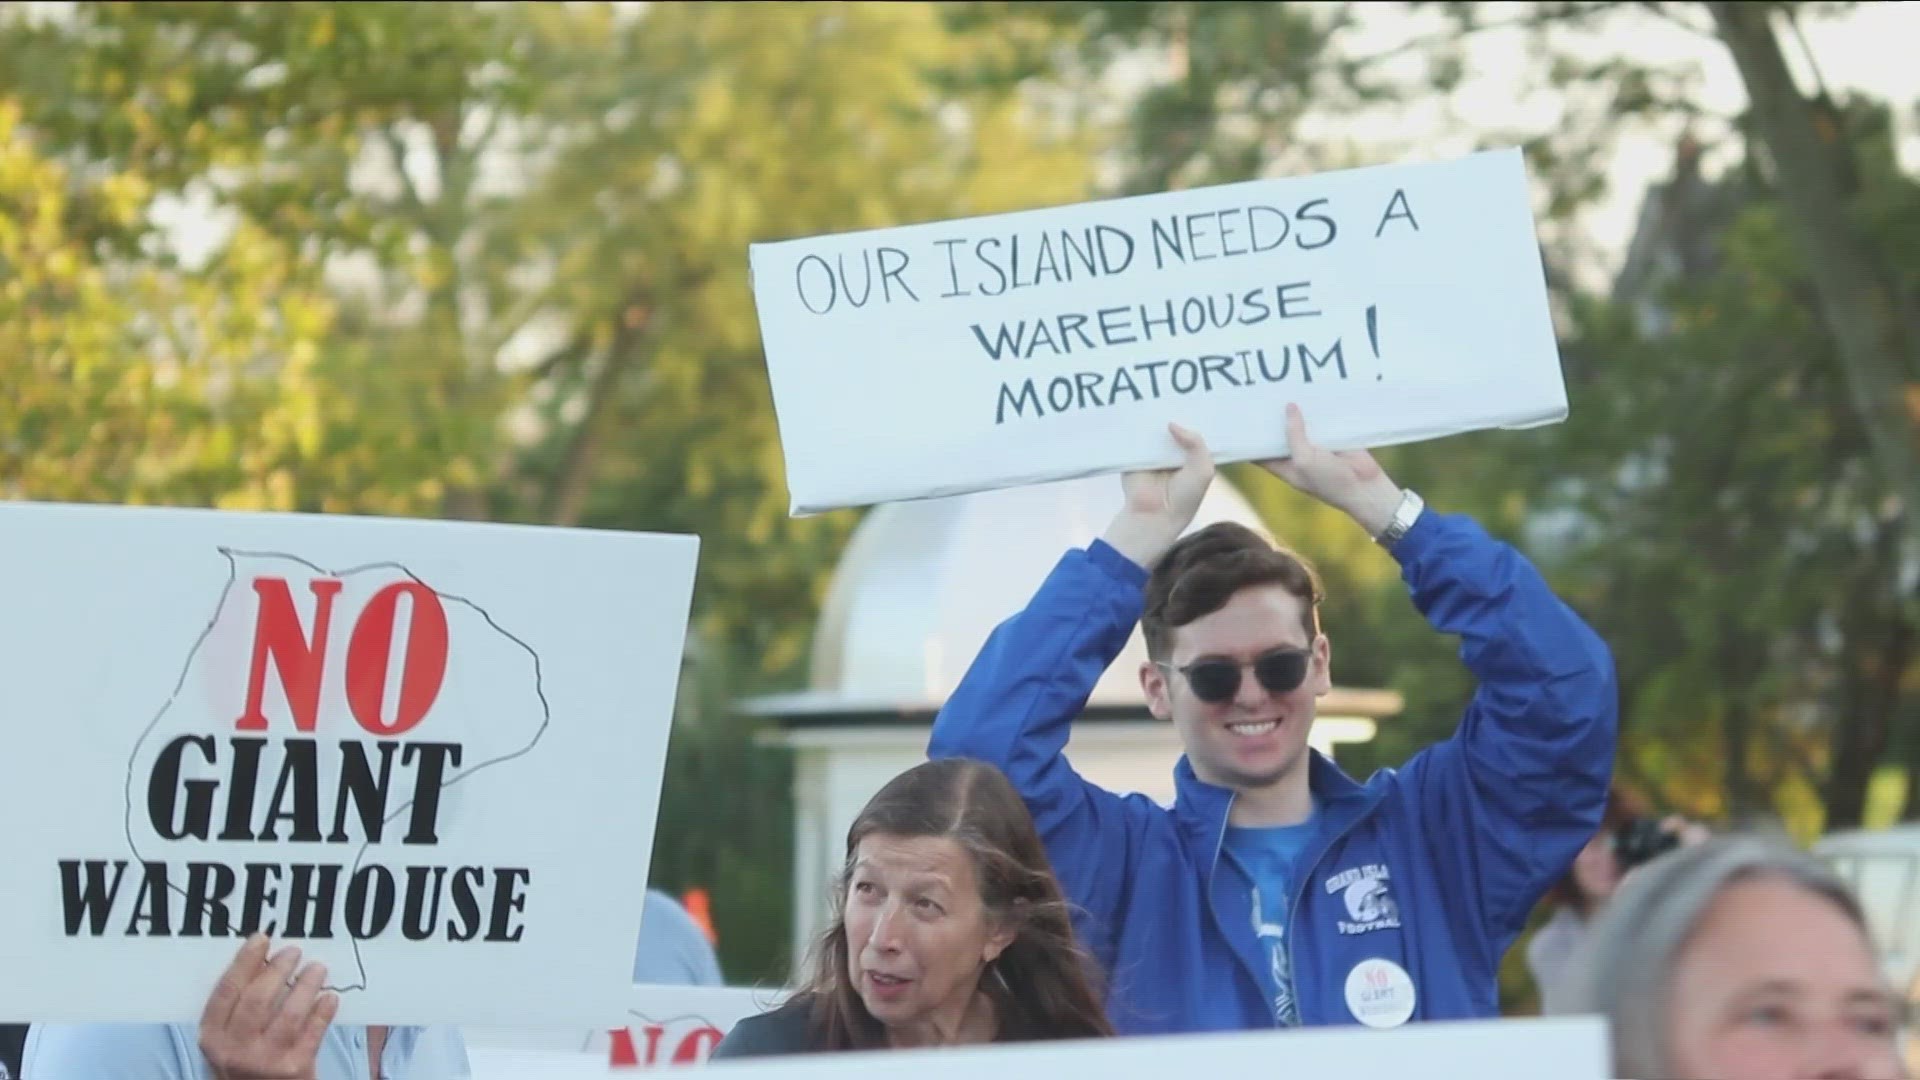 Residents in Grand Island are protesting a proposed new warehouse